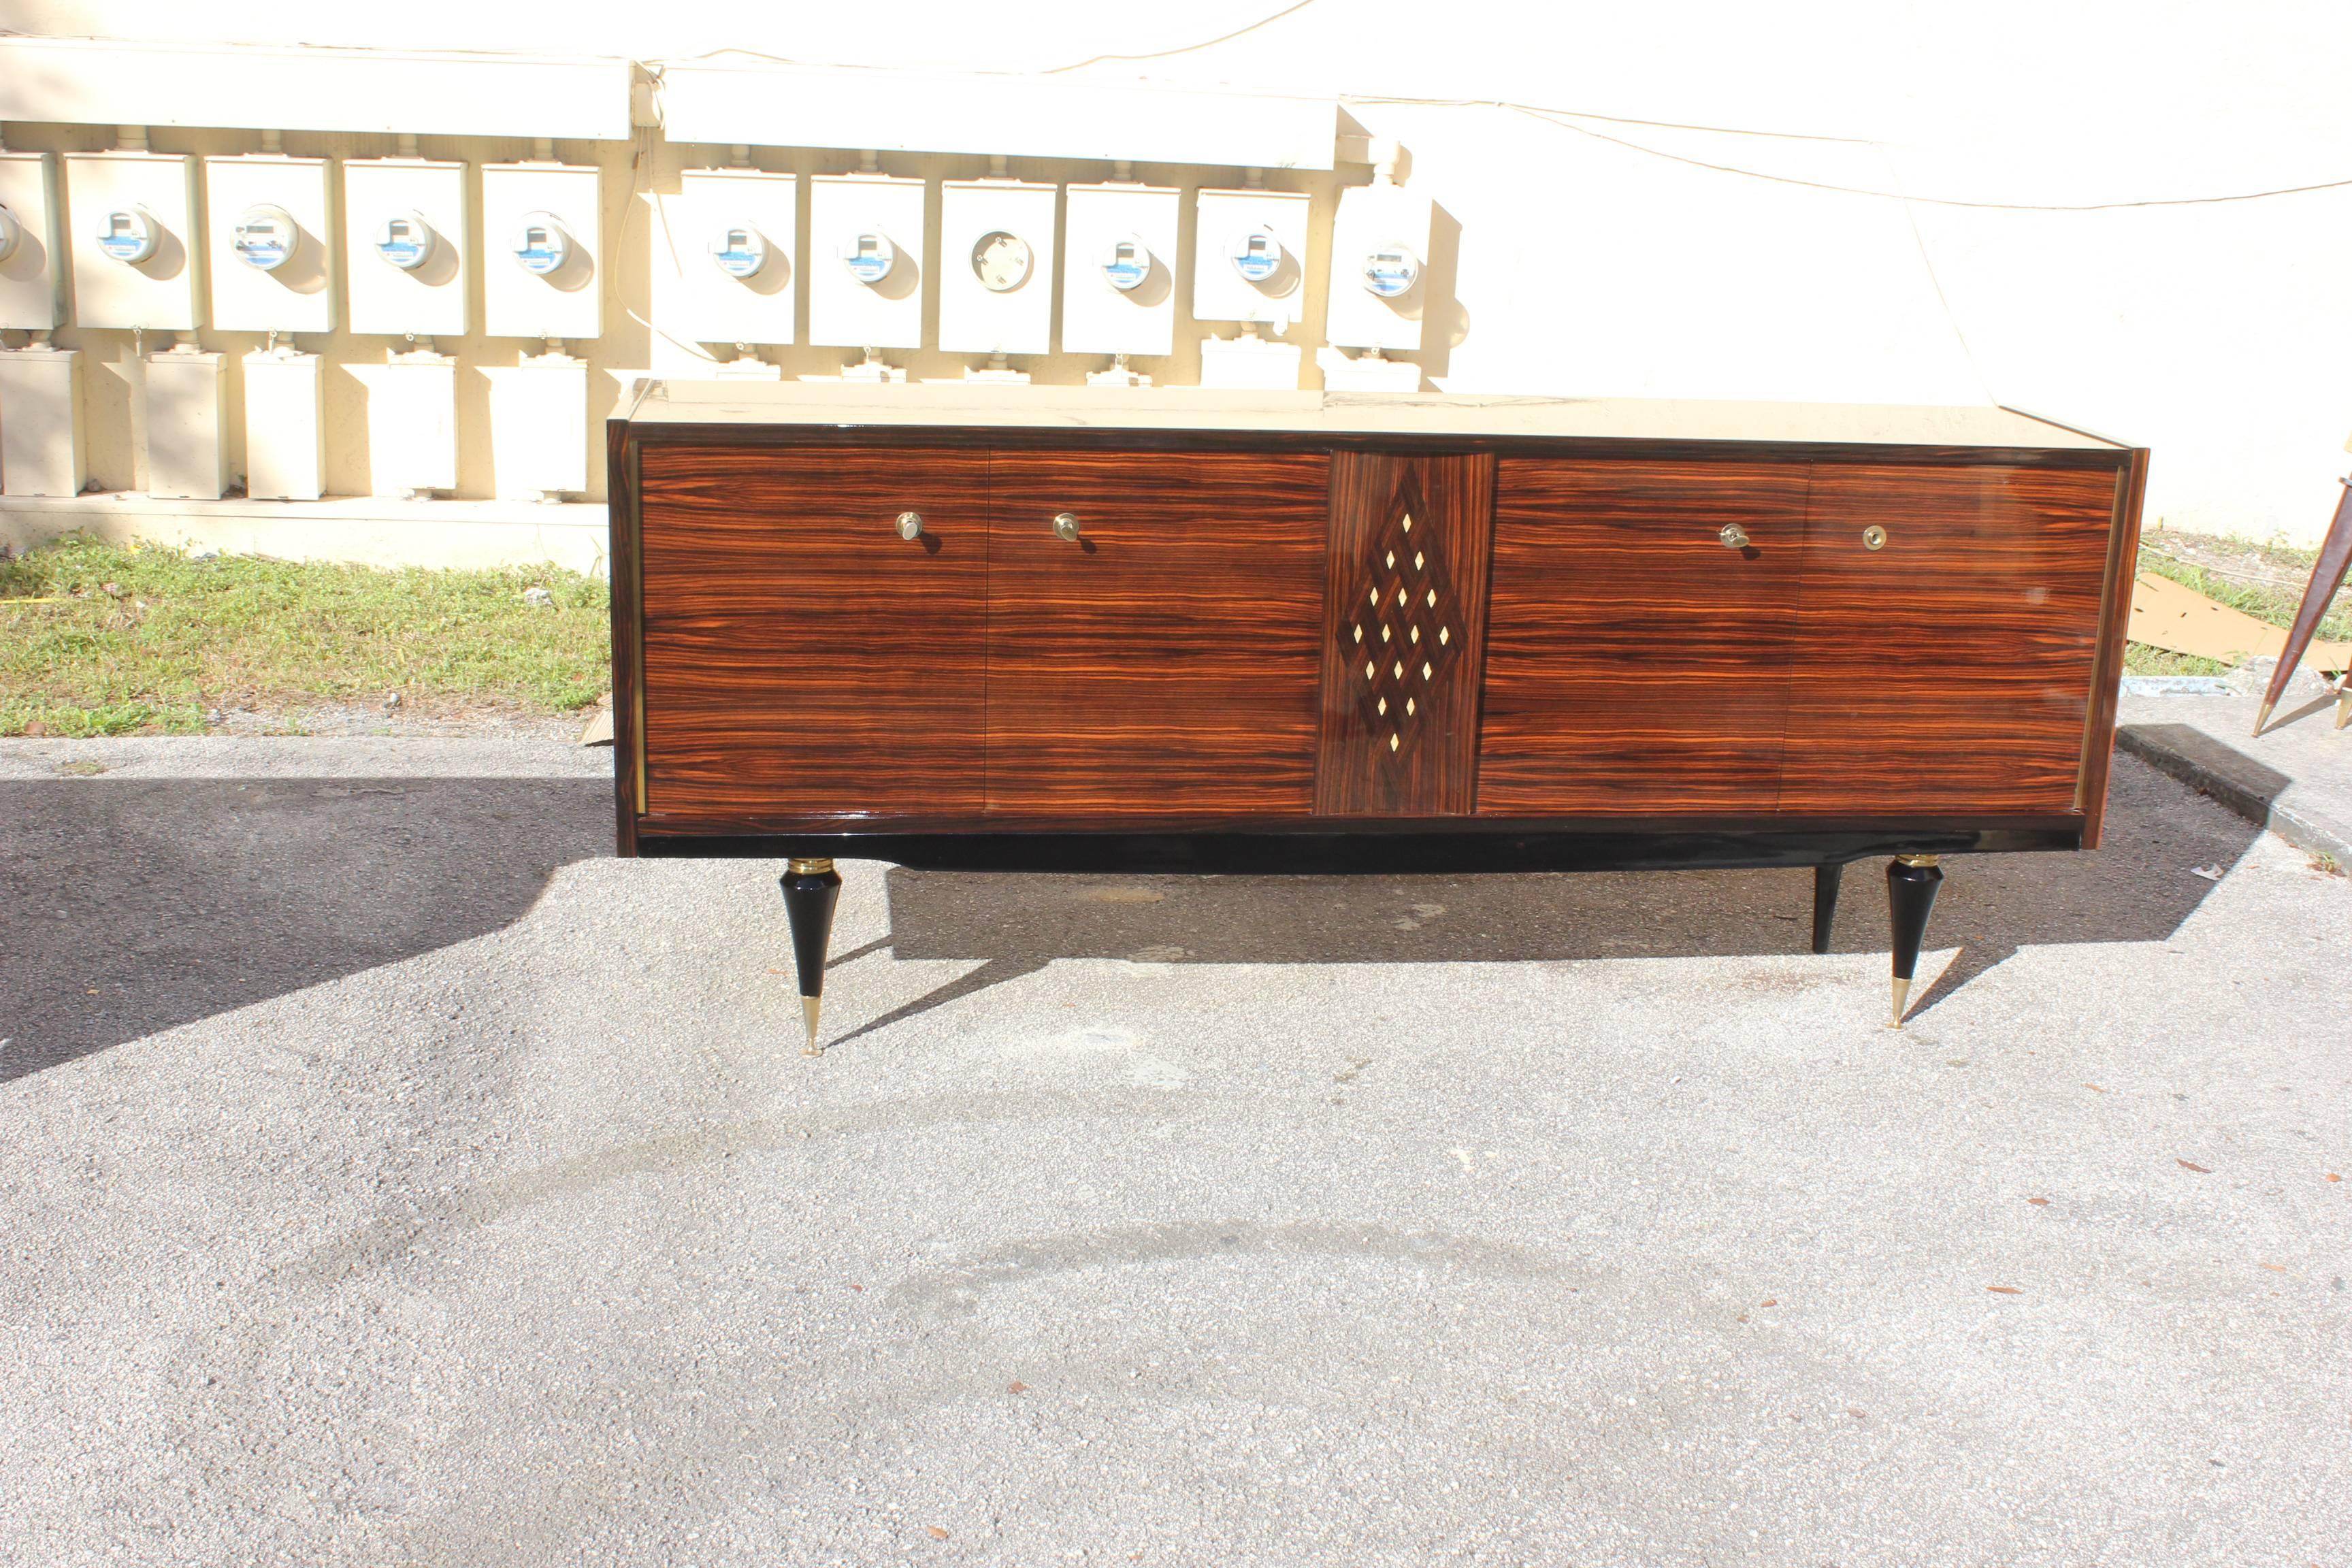 Beautiful French Art Deco Macassar ebony sideboard/buffet with diamond mother-of-pearl center, circa 1940s. Very nice sideboard with diamond Mother-of-Pearl Center with the Macassar ebony wood the sideboard are in very good condition, the piece have